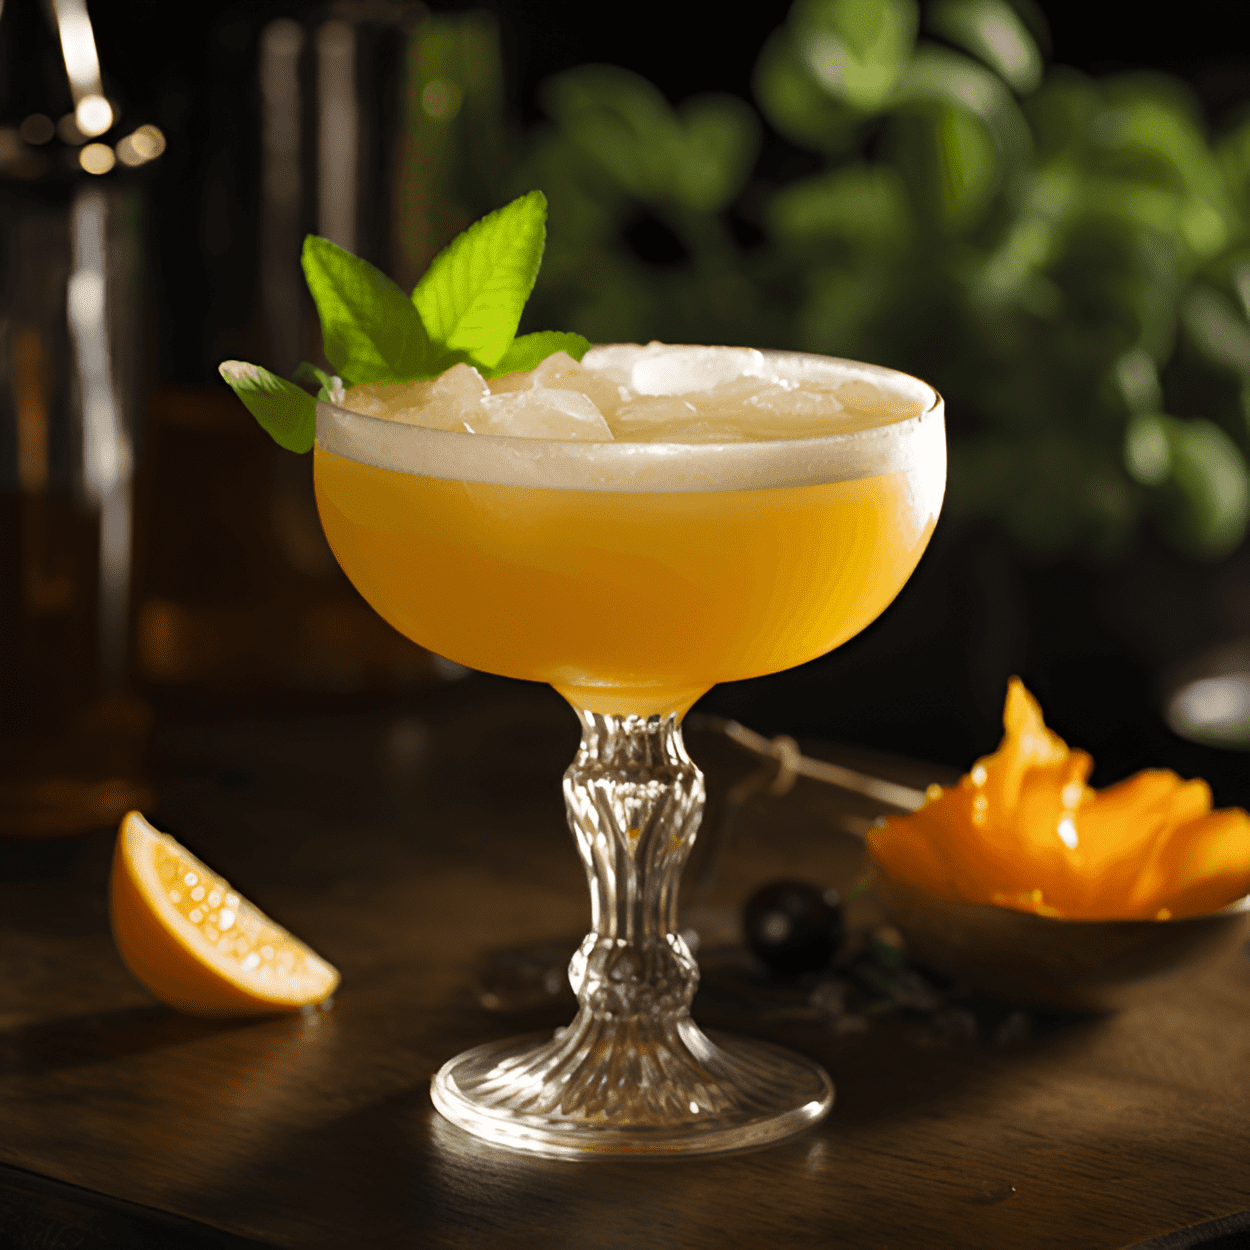 Irish Kiss Cocktail Recipe - The Irish Kiss cocktail has a smooth, sweet, and slightly fruity taste with a hint of warmth from the Irish whiskey. The peach schnapps adds a delicate sweetness, while the orange juice brings a tangy citrus note.